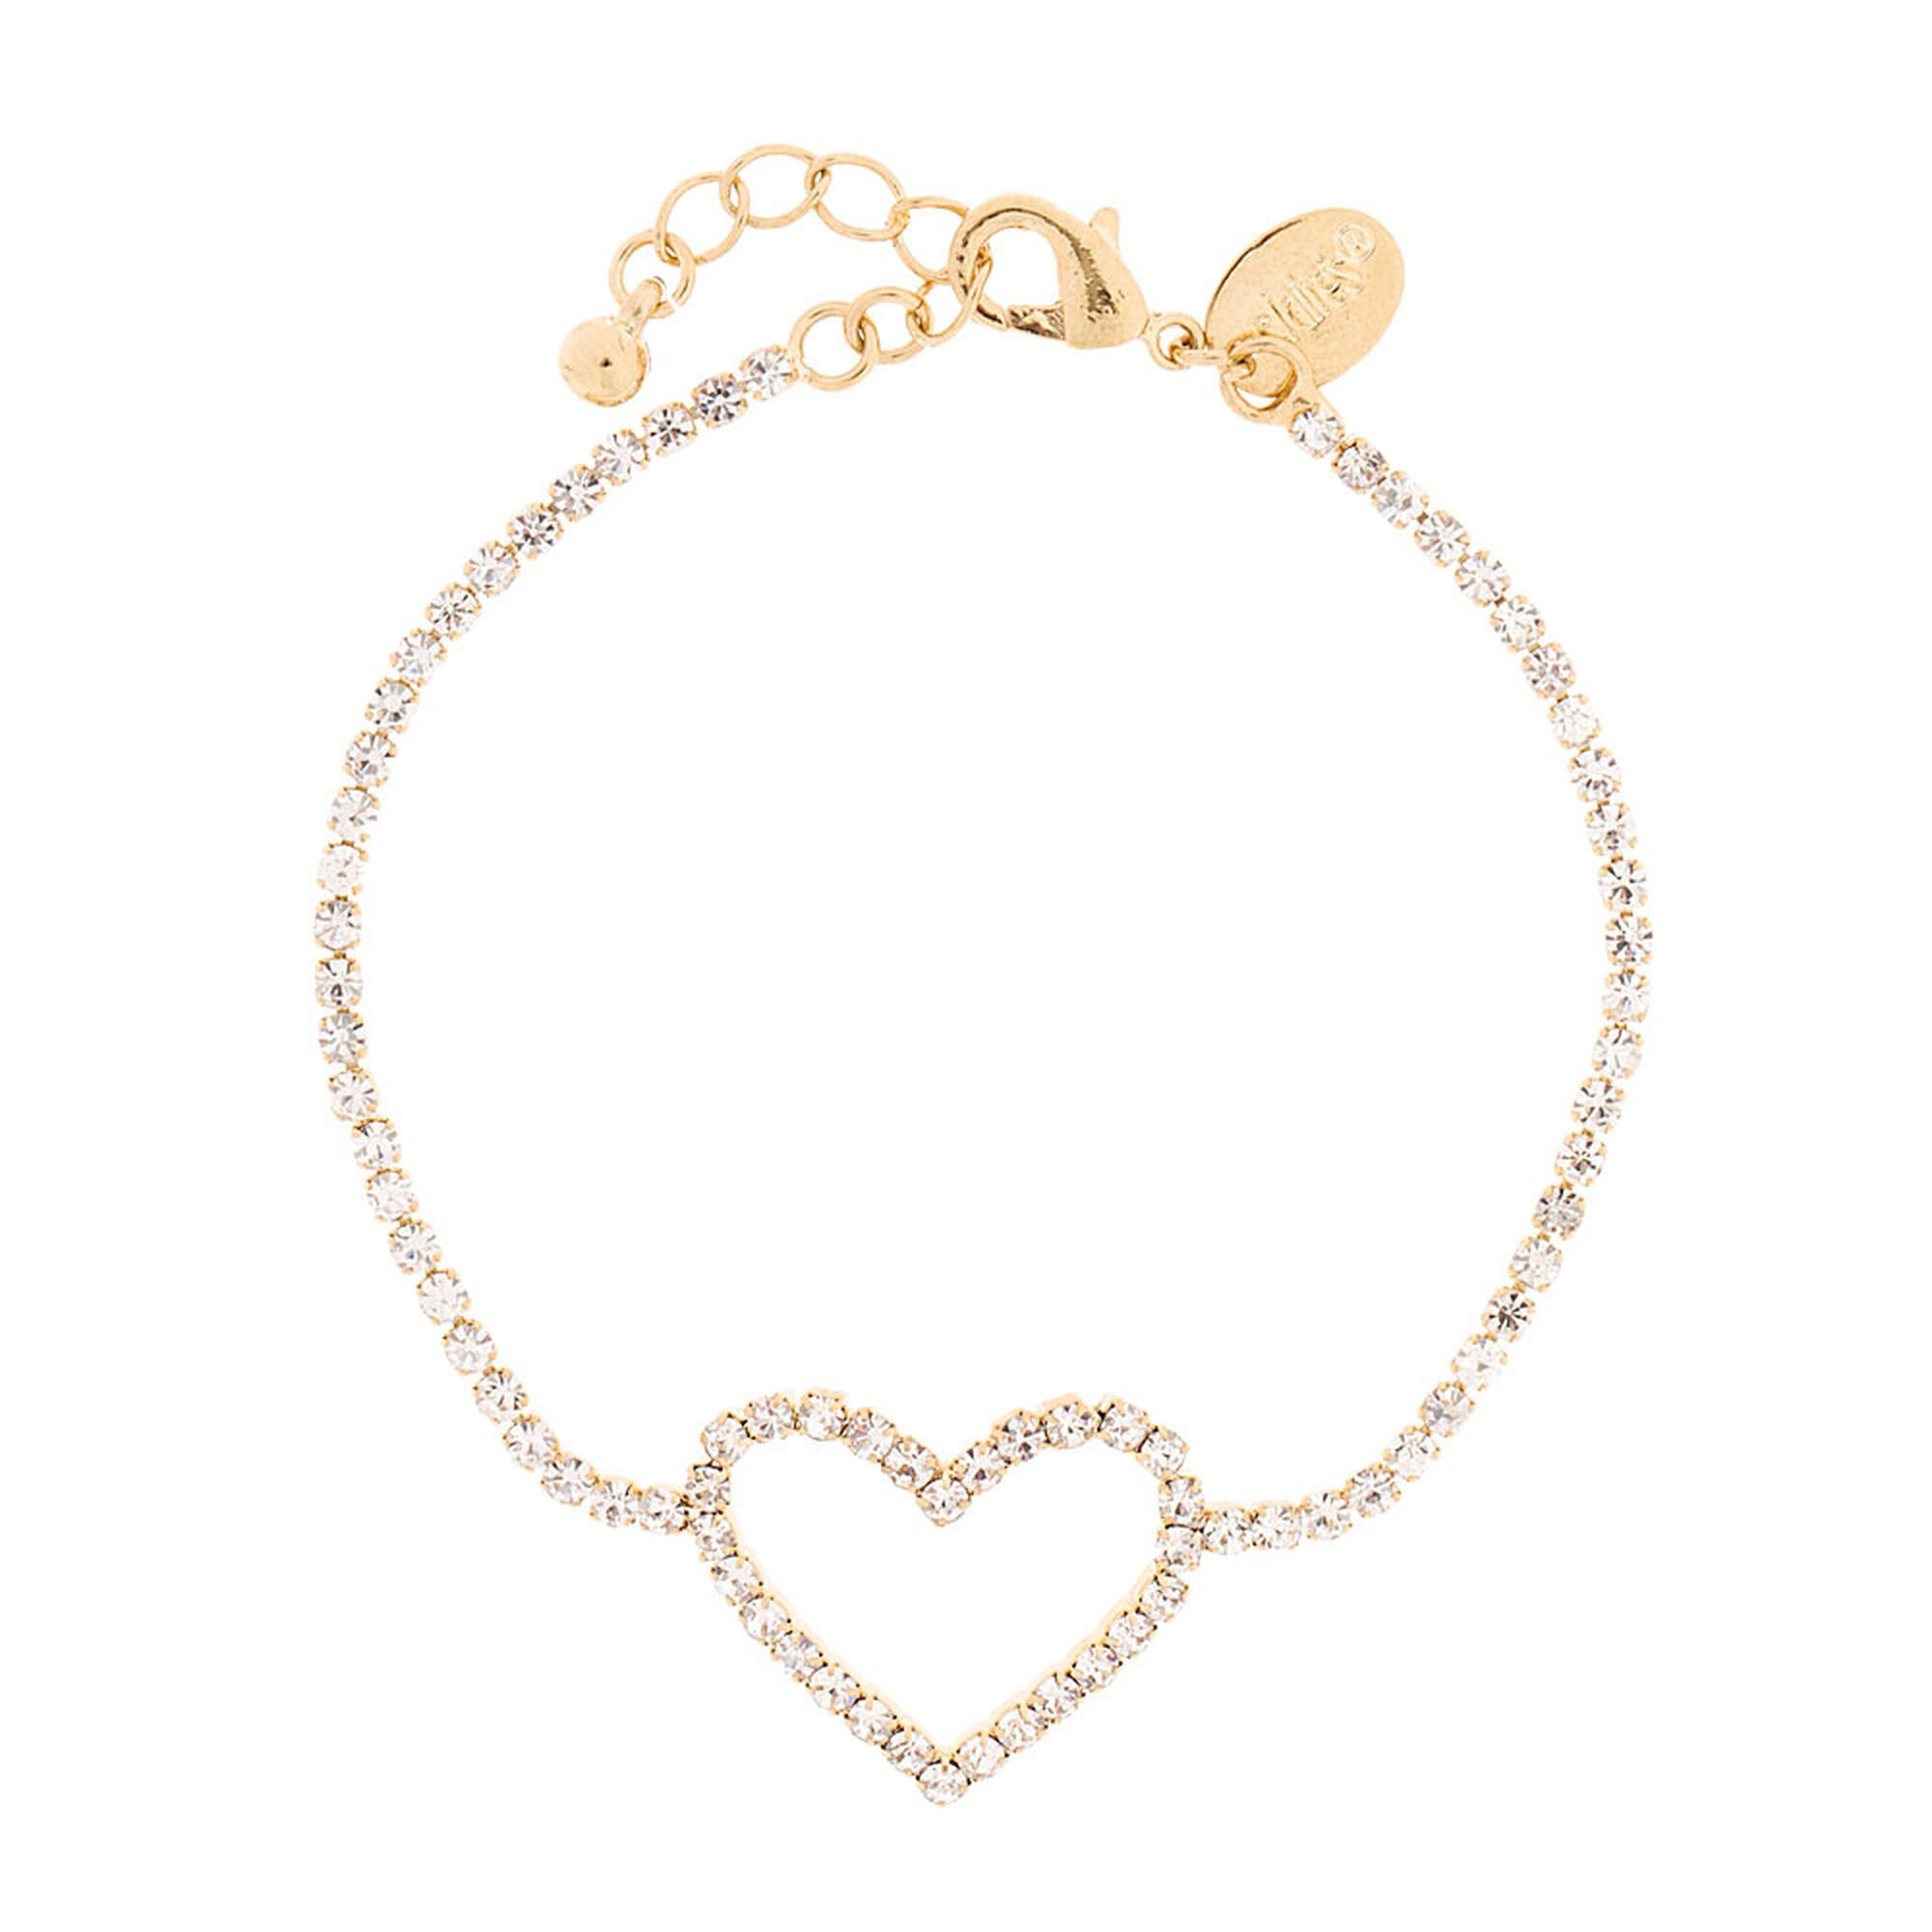 View Claires Tone Rhinestone Open Heart Chain Bracelet Gold information